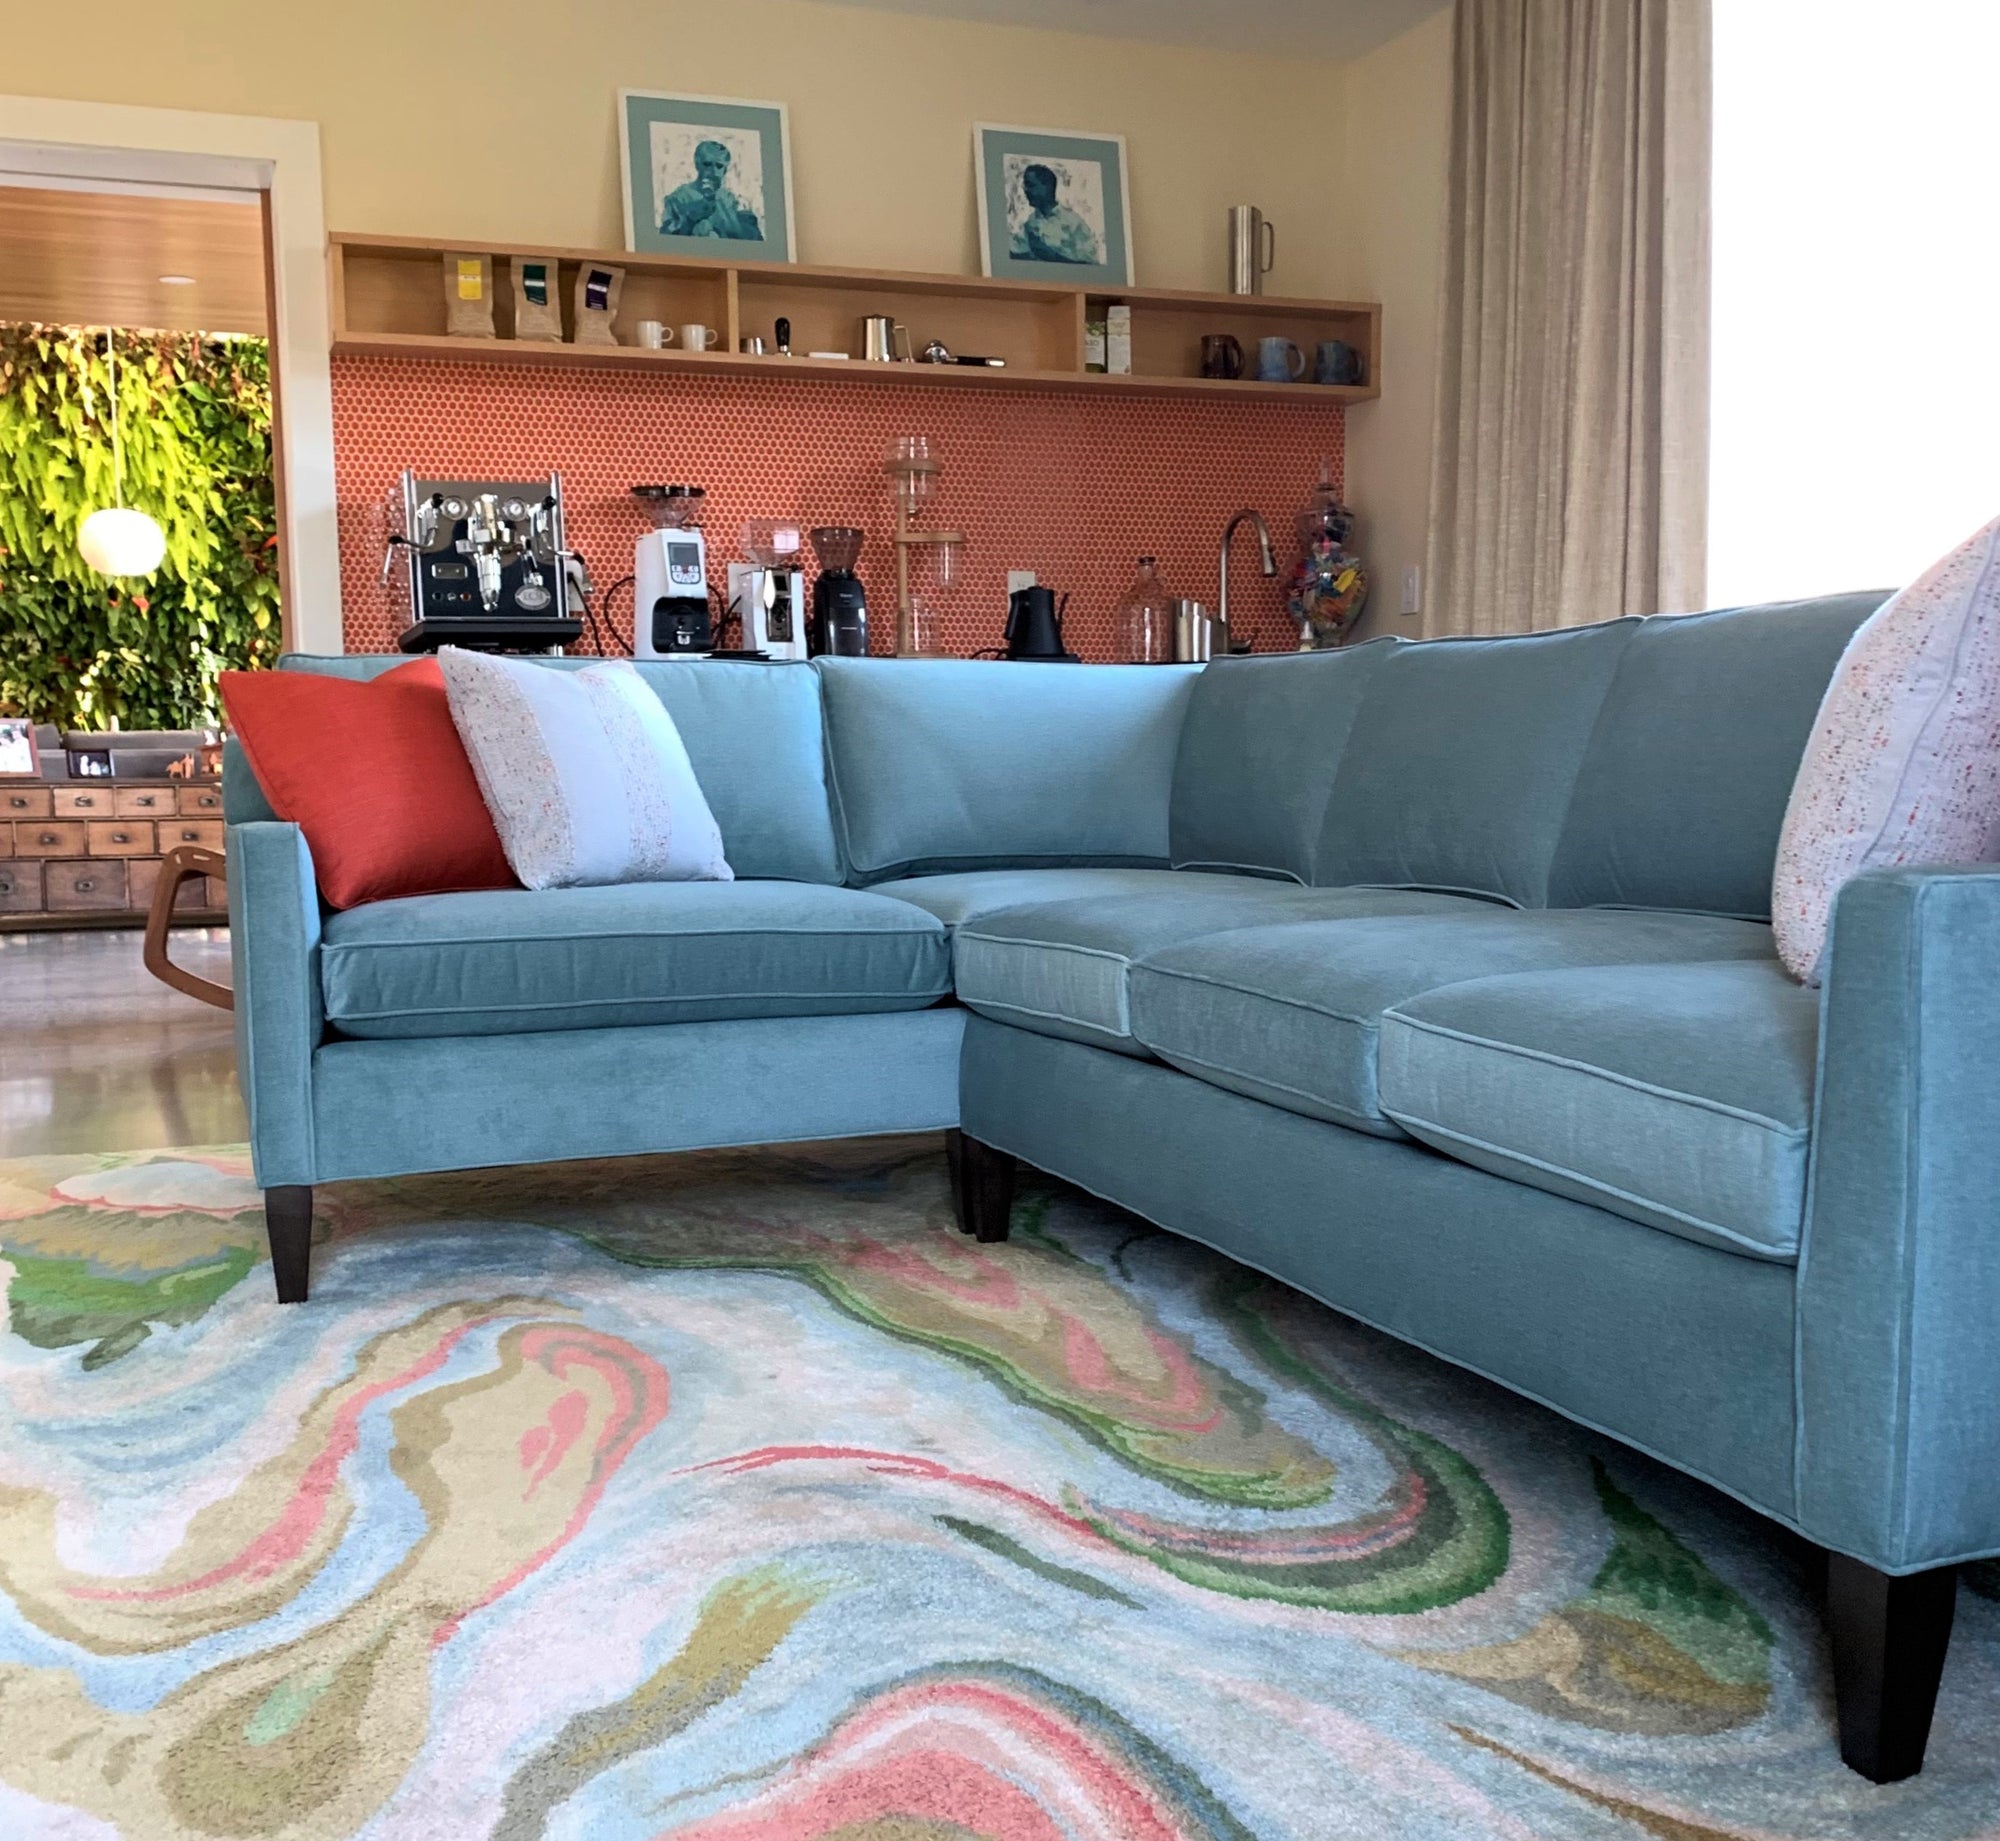 A living room featuring a couch and rug from Endicott Home Furnishings